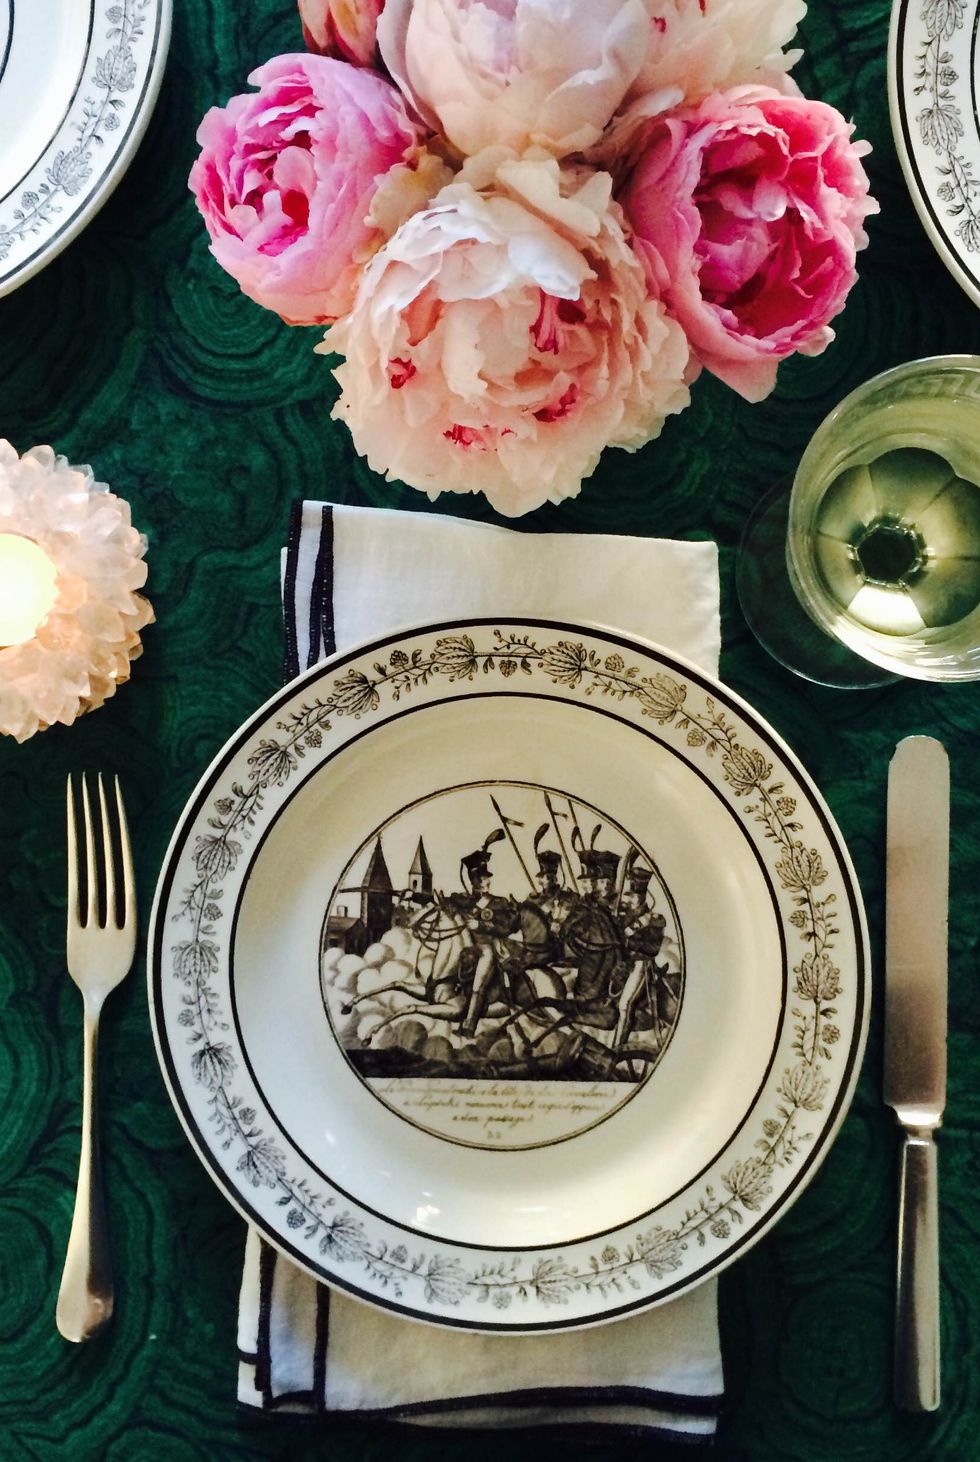 <p>And in focusing on the table, feel free to deviate from the standard red-and-green. "Rather than the traditional red and green scheme, try something new like a fabric in malachite and hot pink peonies," says designer <a href="http://grantkgibson.com" target="_blank">Grant Gibson</a>. "Layer in black and white for a graphic pop. The plates [here] are antique French."</p>